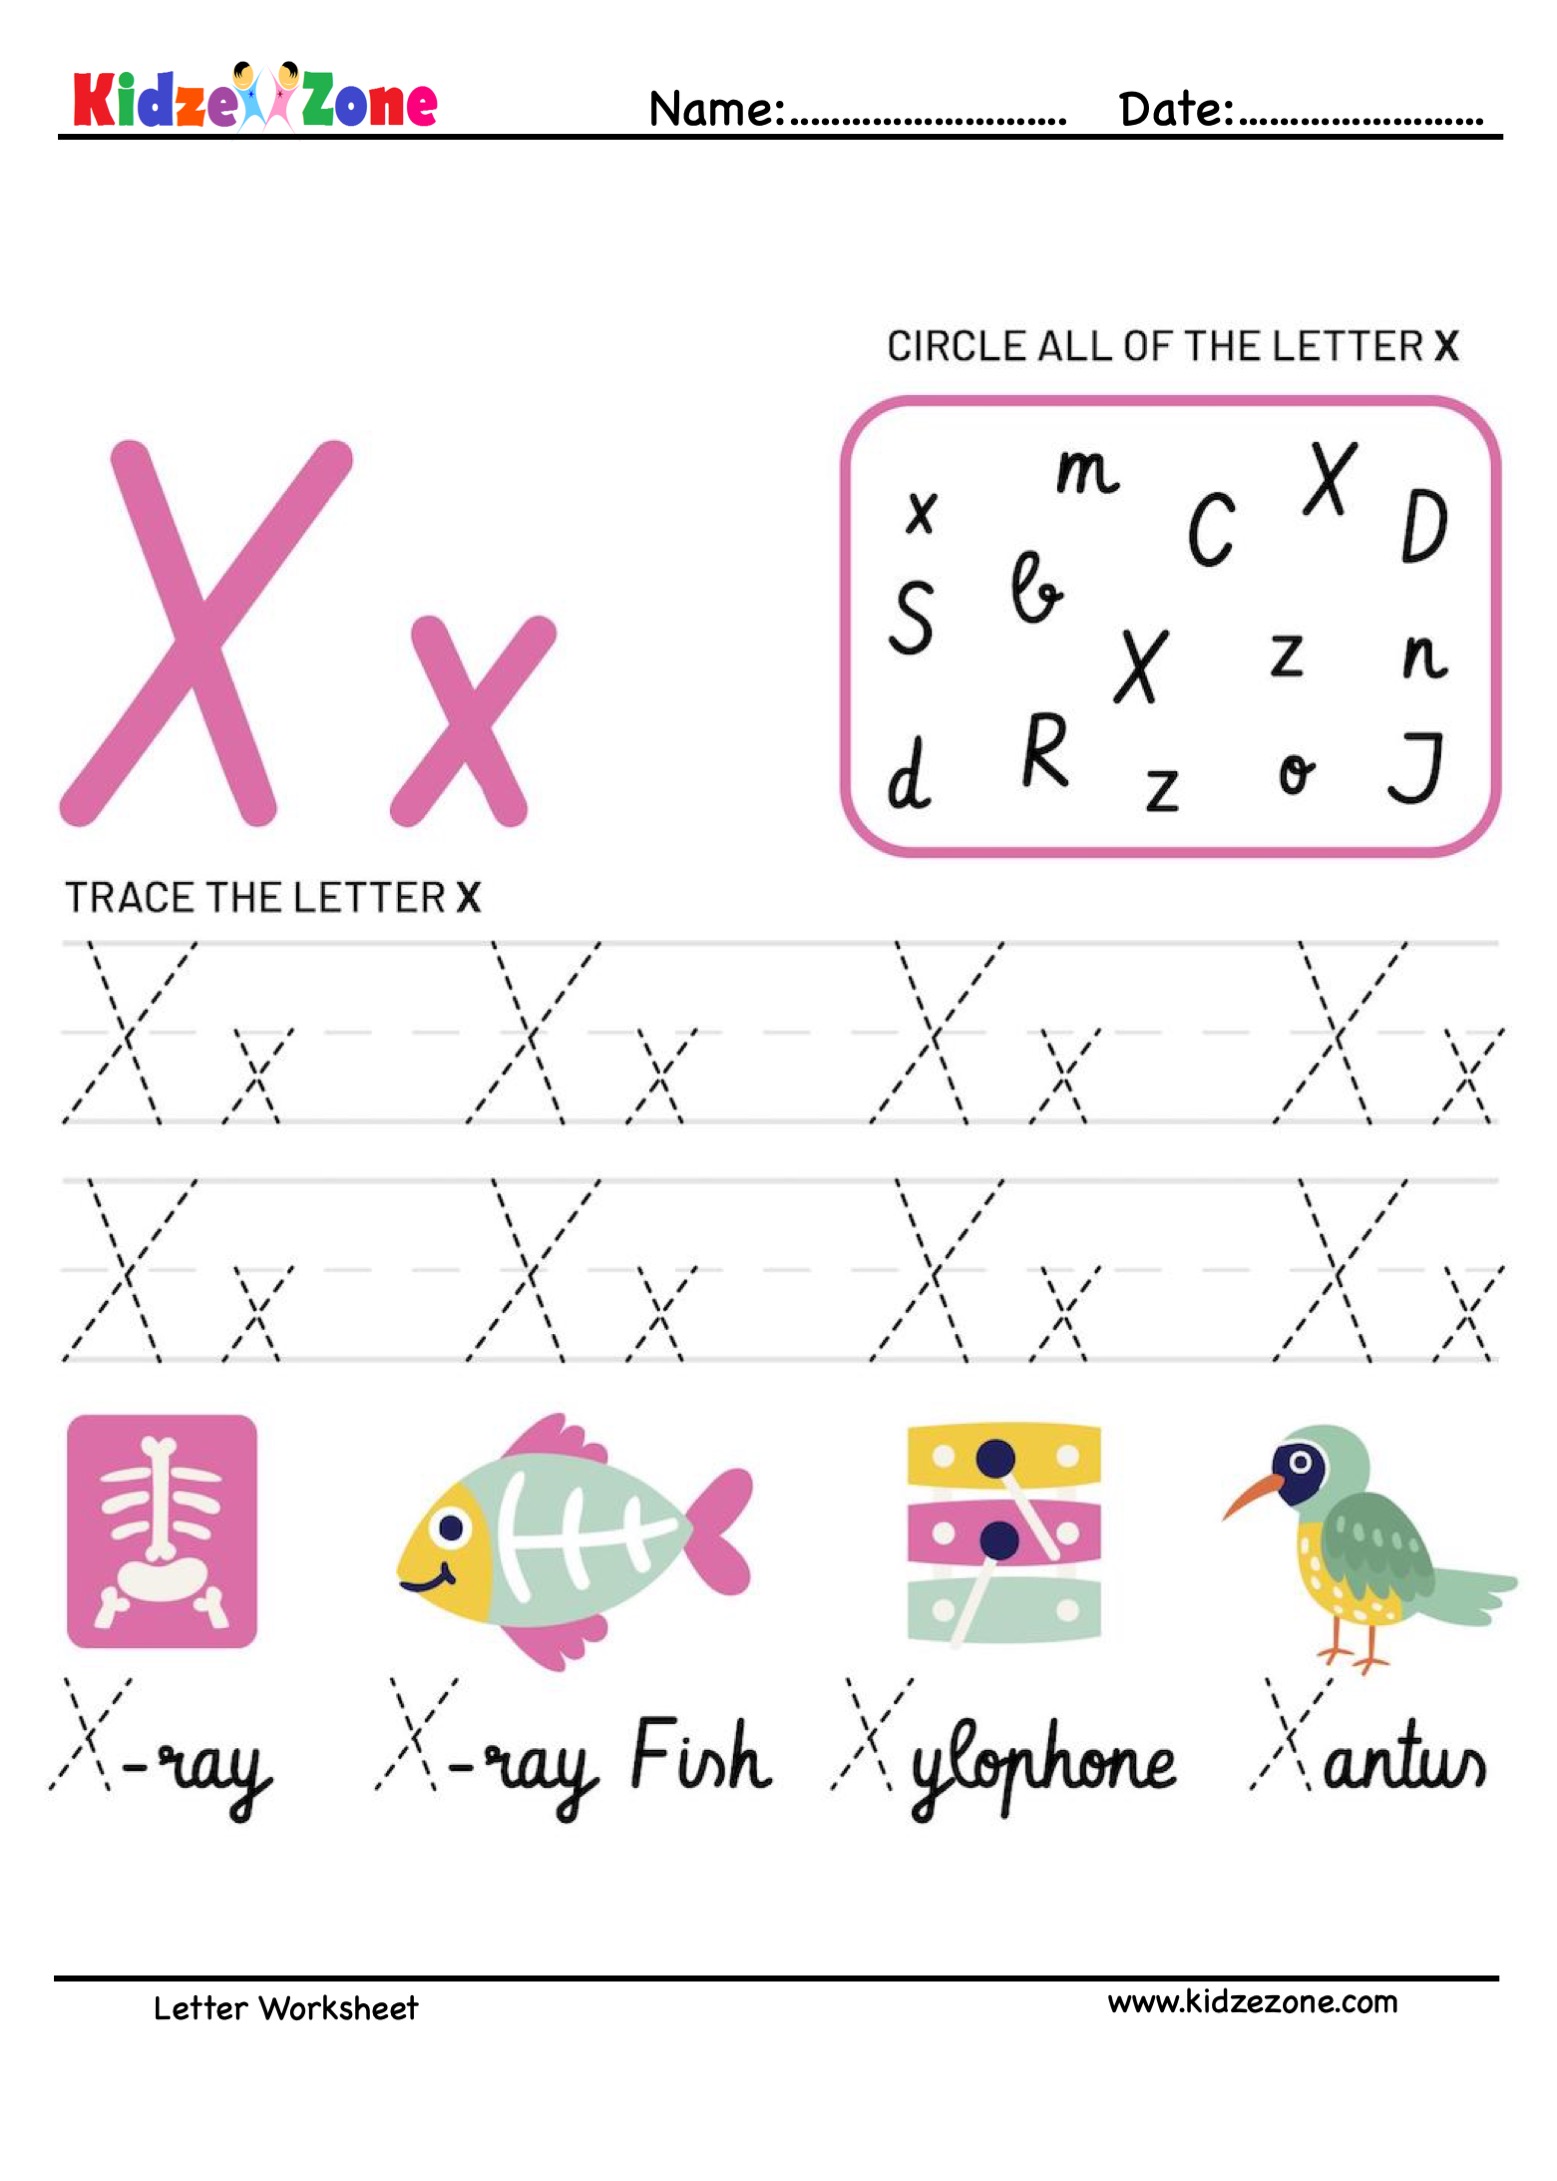 letter-x-phonics-sound-action-jolly-phonics-letter-x-phonic-song